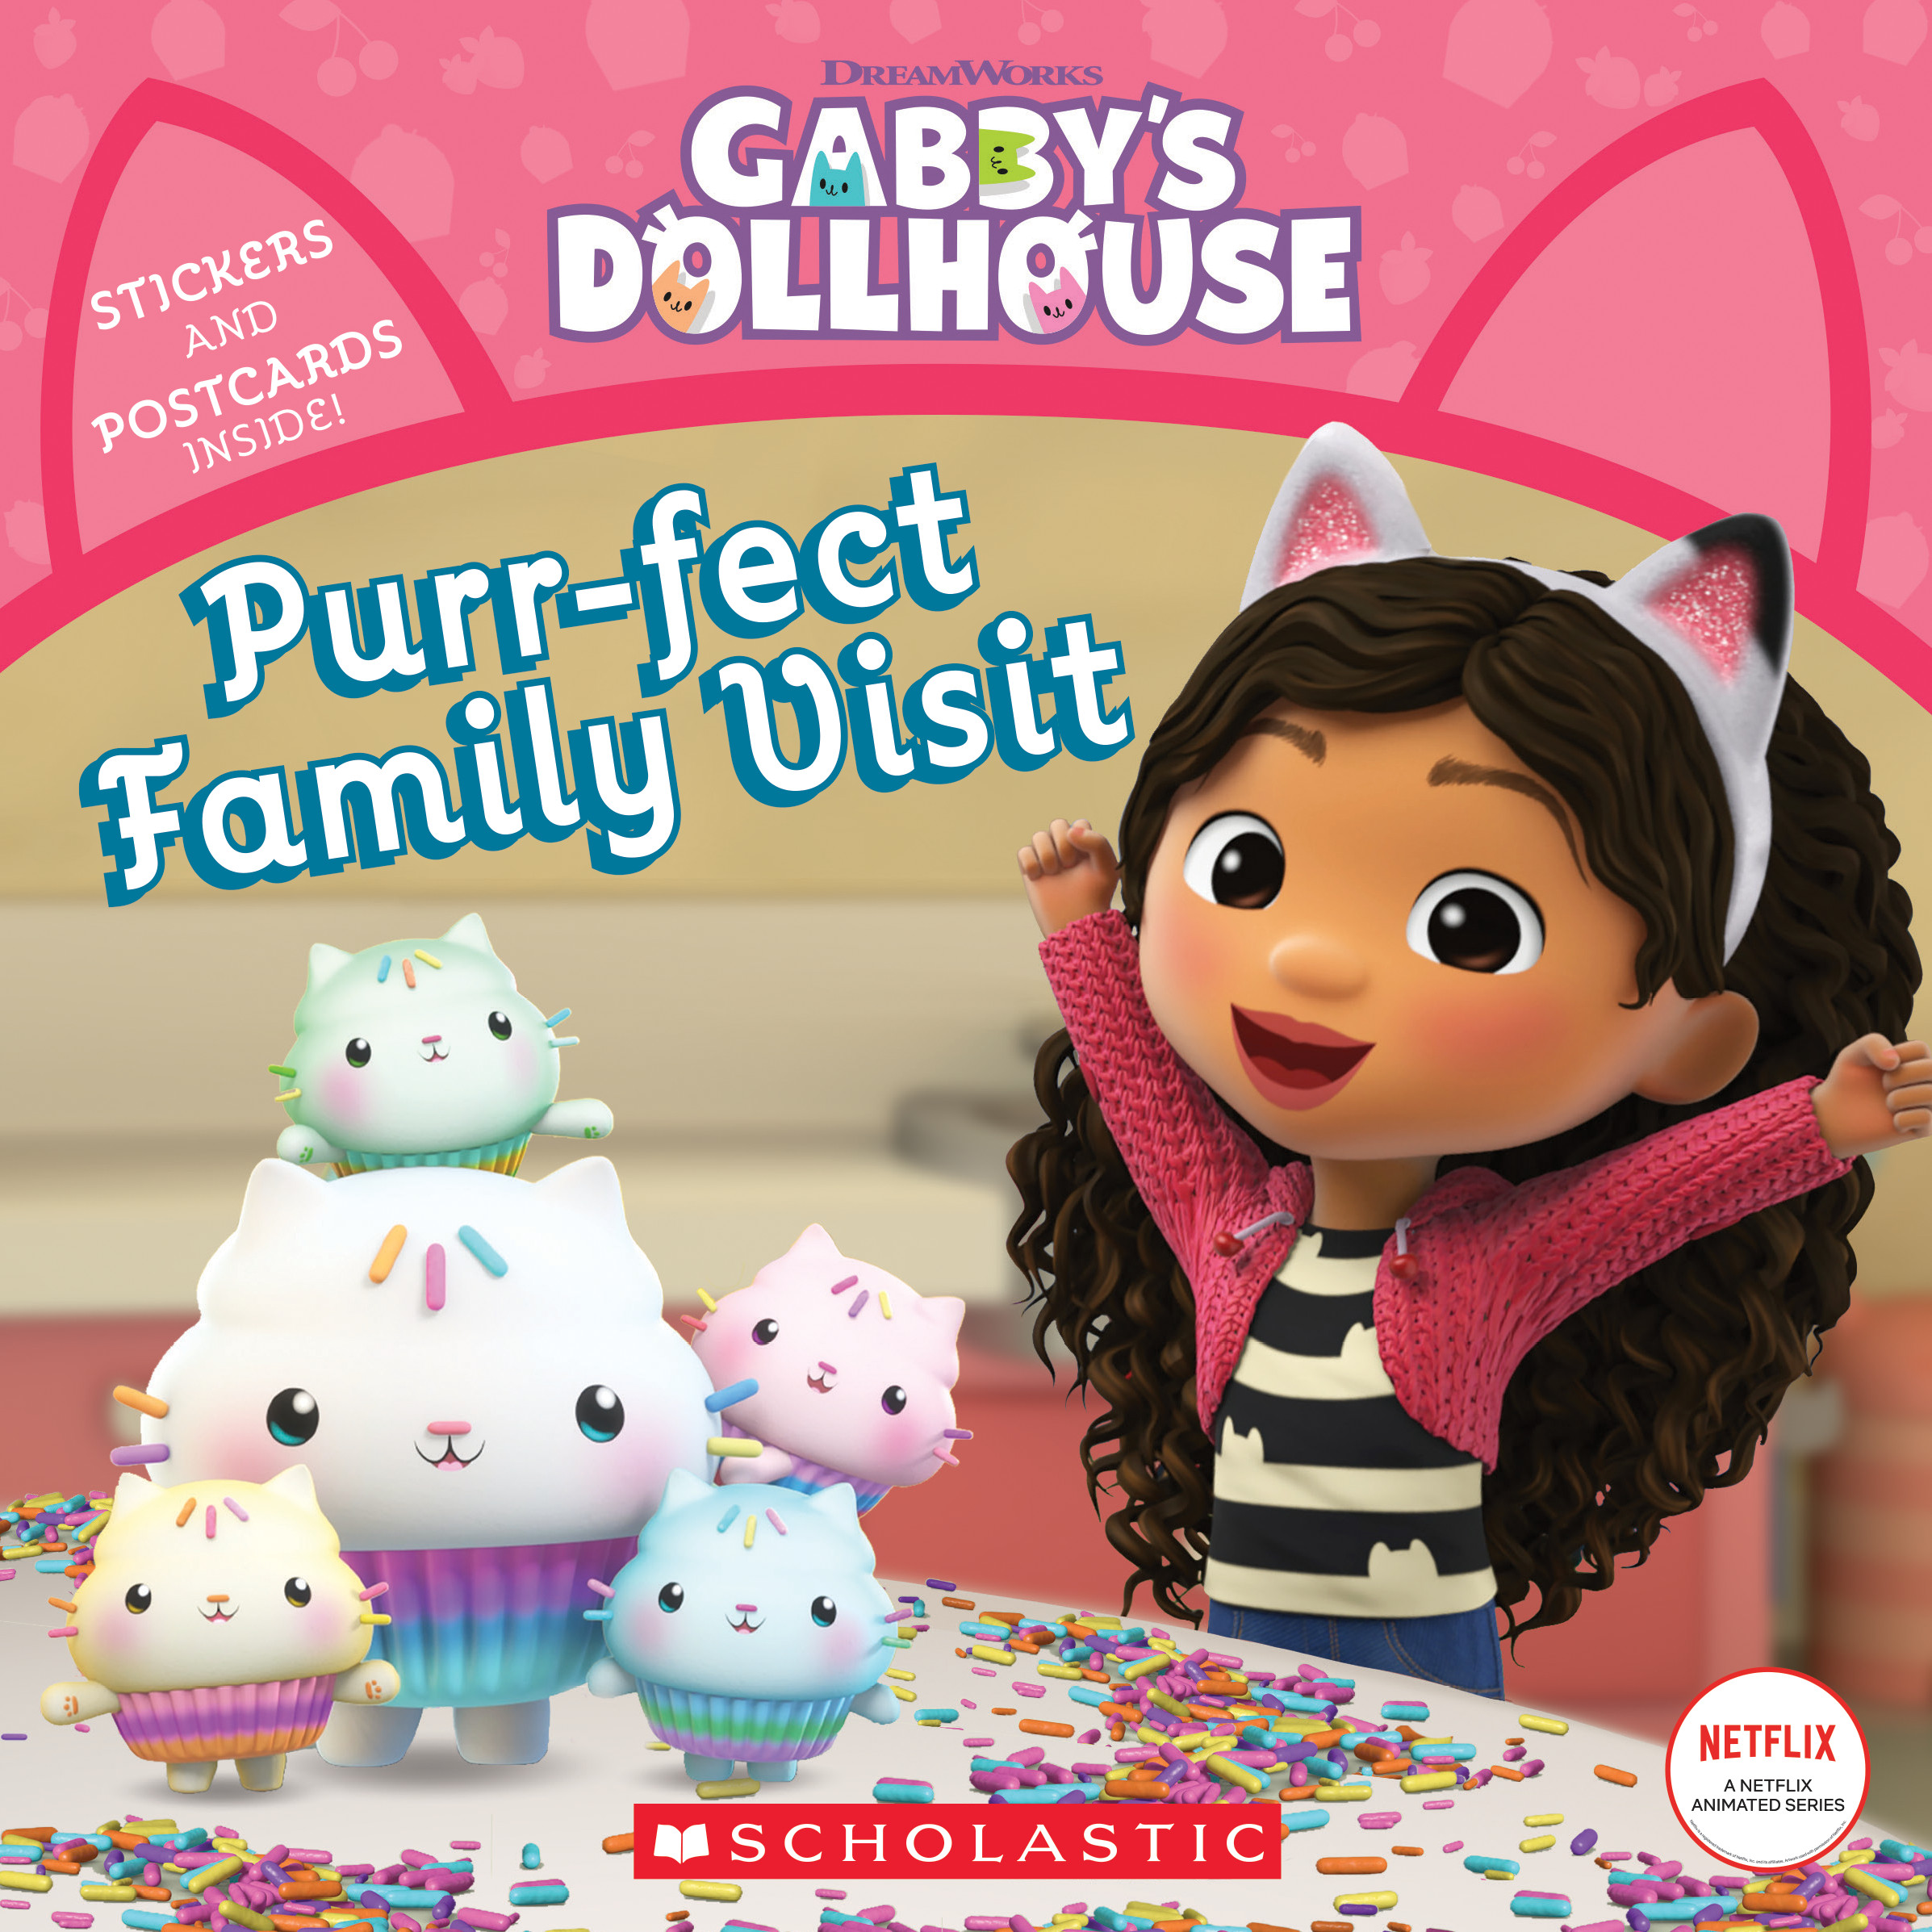 Gabby's Dollhouse #5: Purr-fect Family Visit Front Cover (Published by Scholastic Inc.)